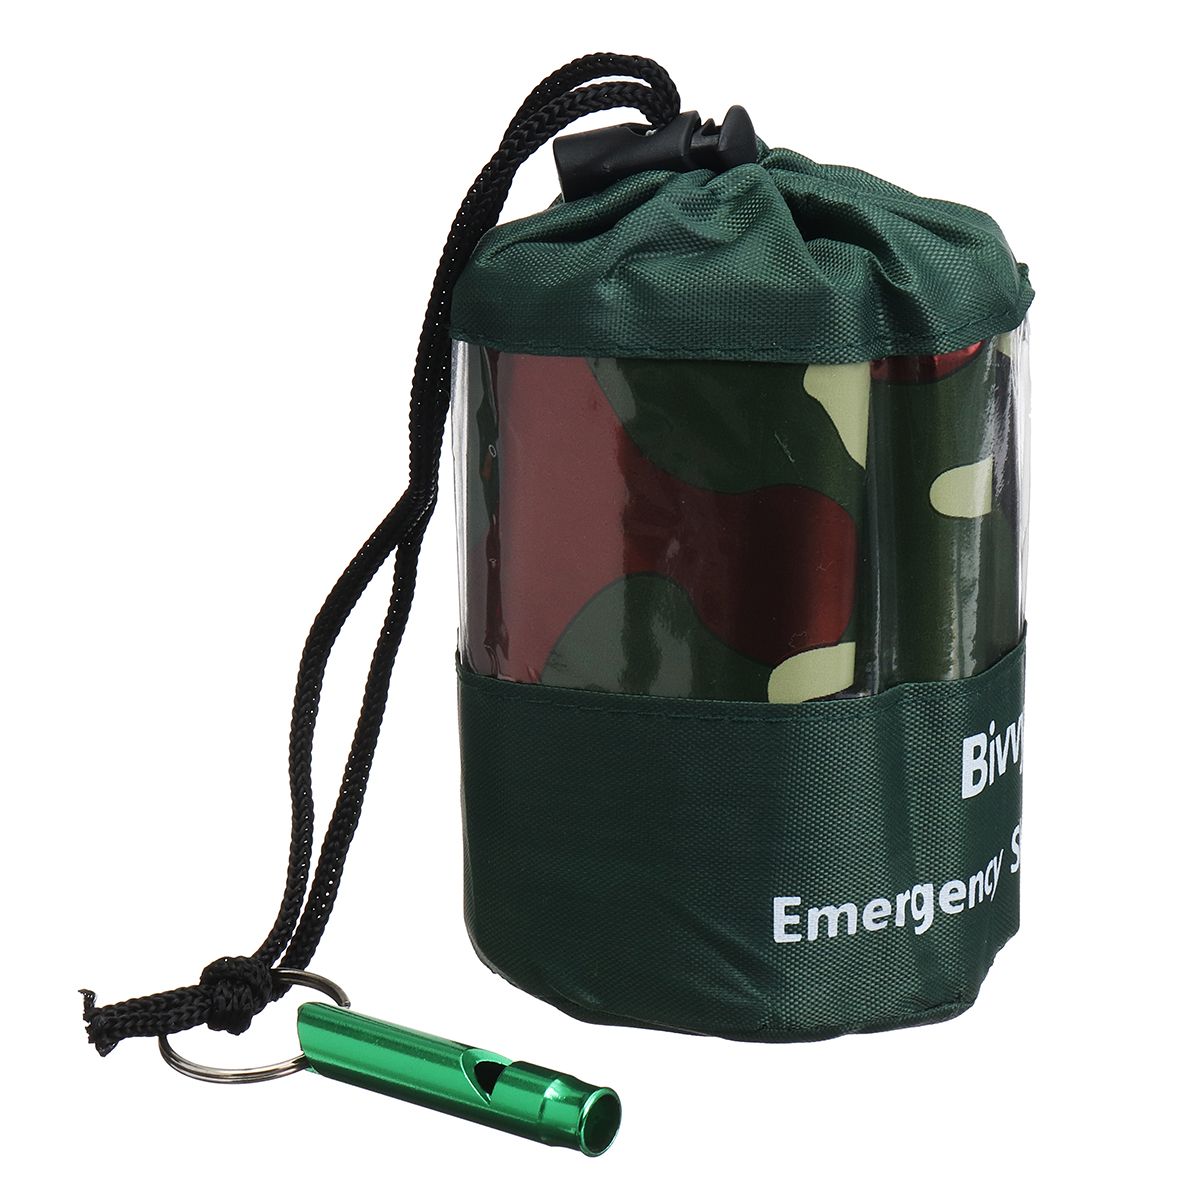 Ultralight-Portable-Emergency-Sleeping-Bag-With-Survival-Whistle-Outdoor-1557876